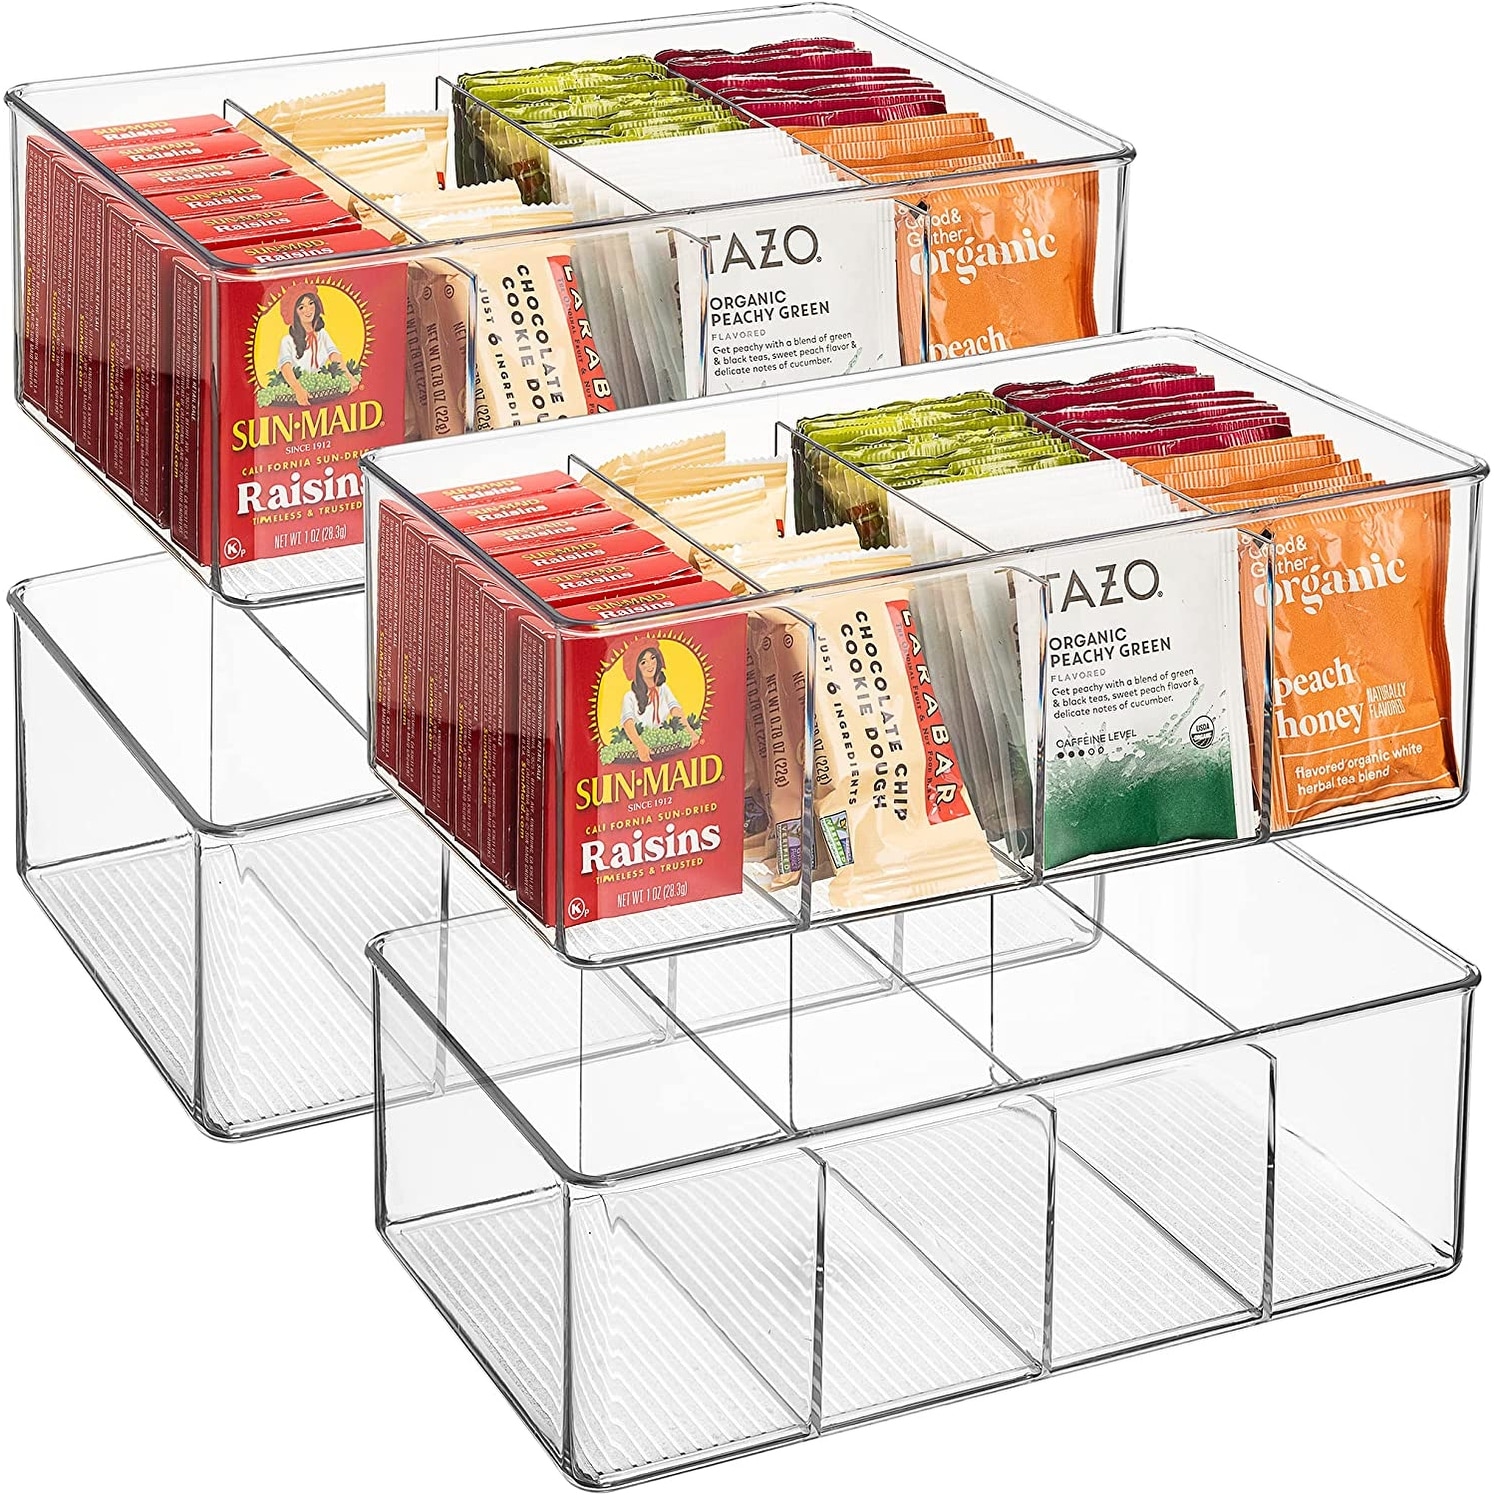 https://ak1.ostkcdn.com/images/products/is/images/direct/0d6ae94c078e5d2d5d15cdd419557dd289d12183/Sorbus-Storage-Bins-with-Dividers-for-Pantry-Food-%26-Kitchen-Fridge%2C-Clear-Design-%284-Pack%29.jpg